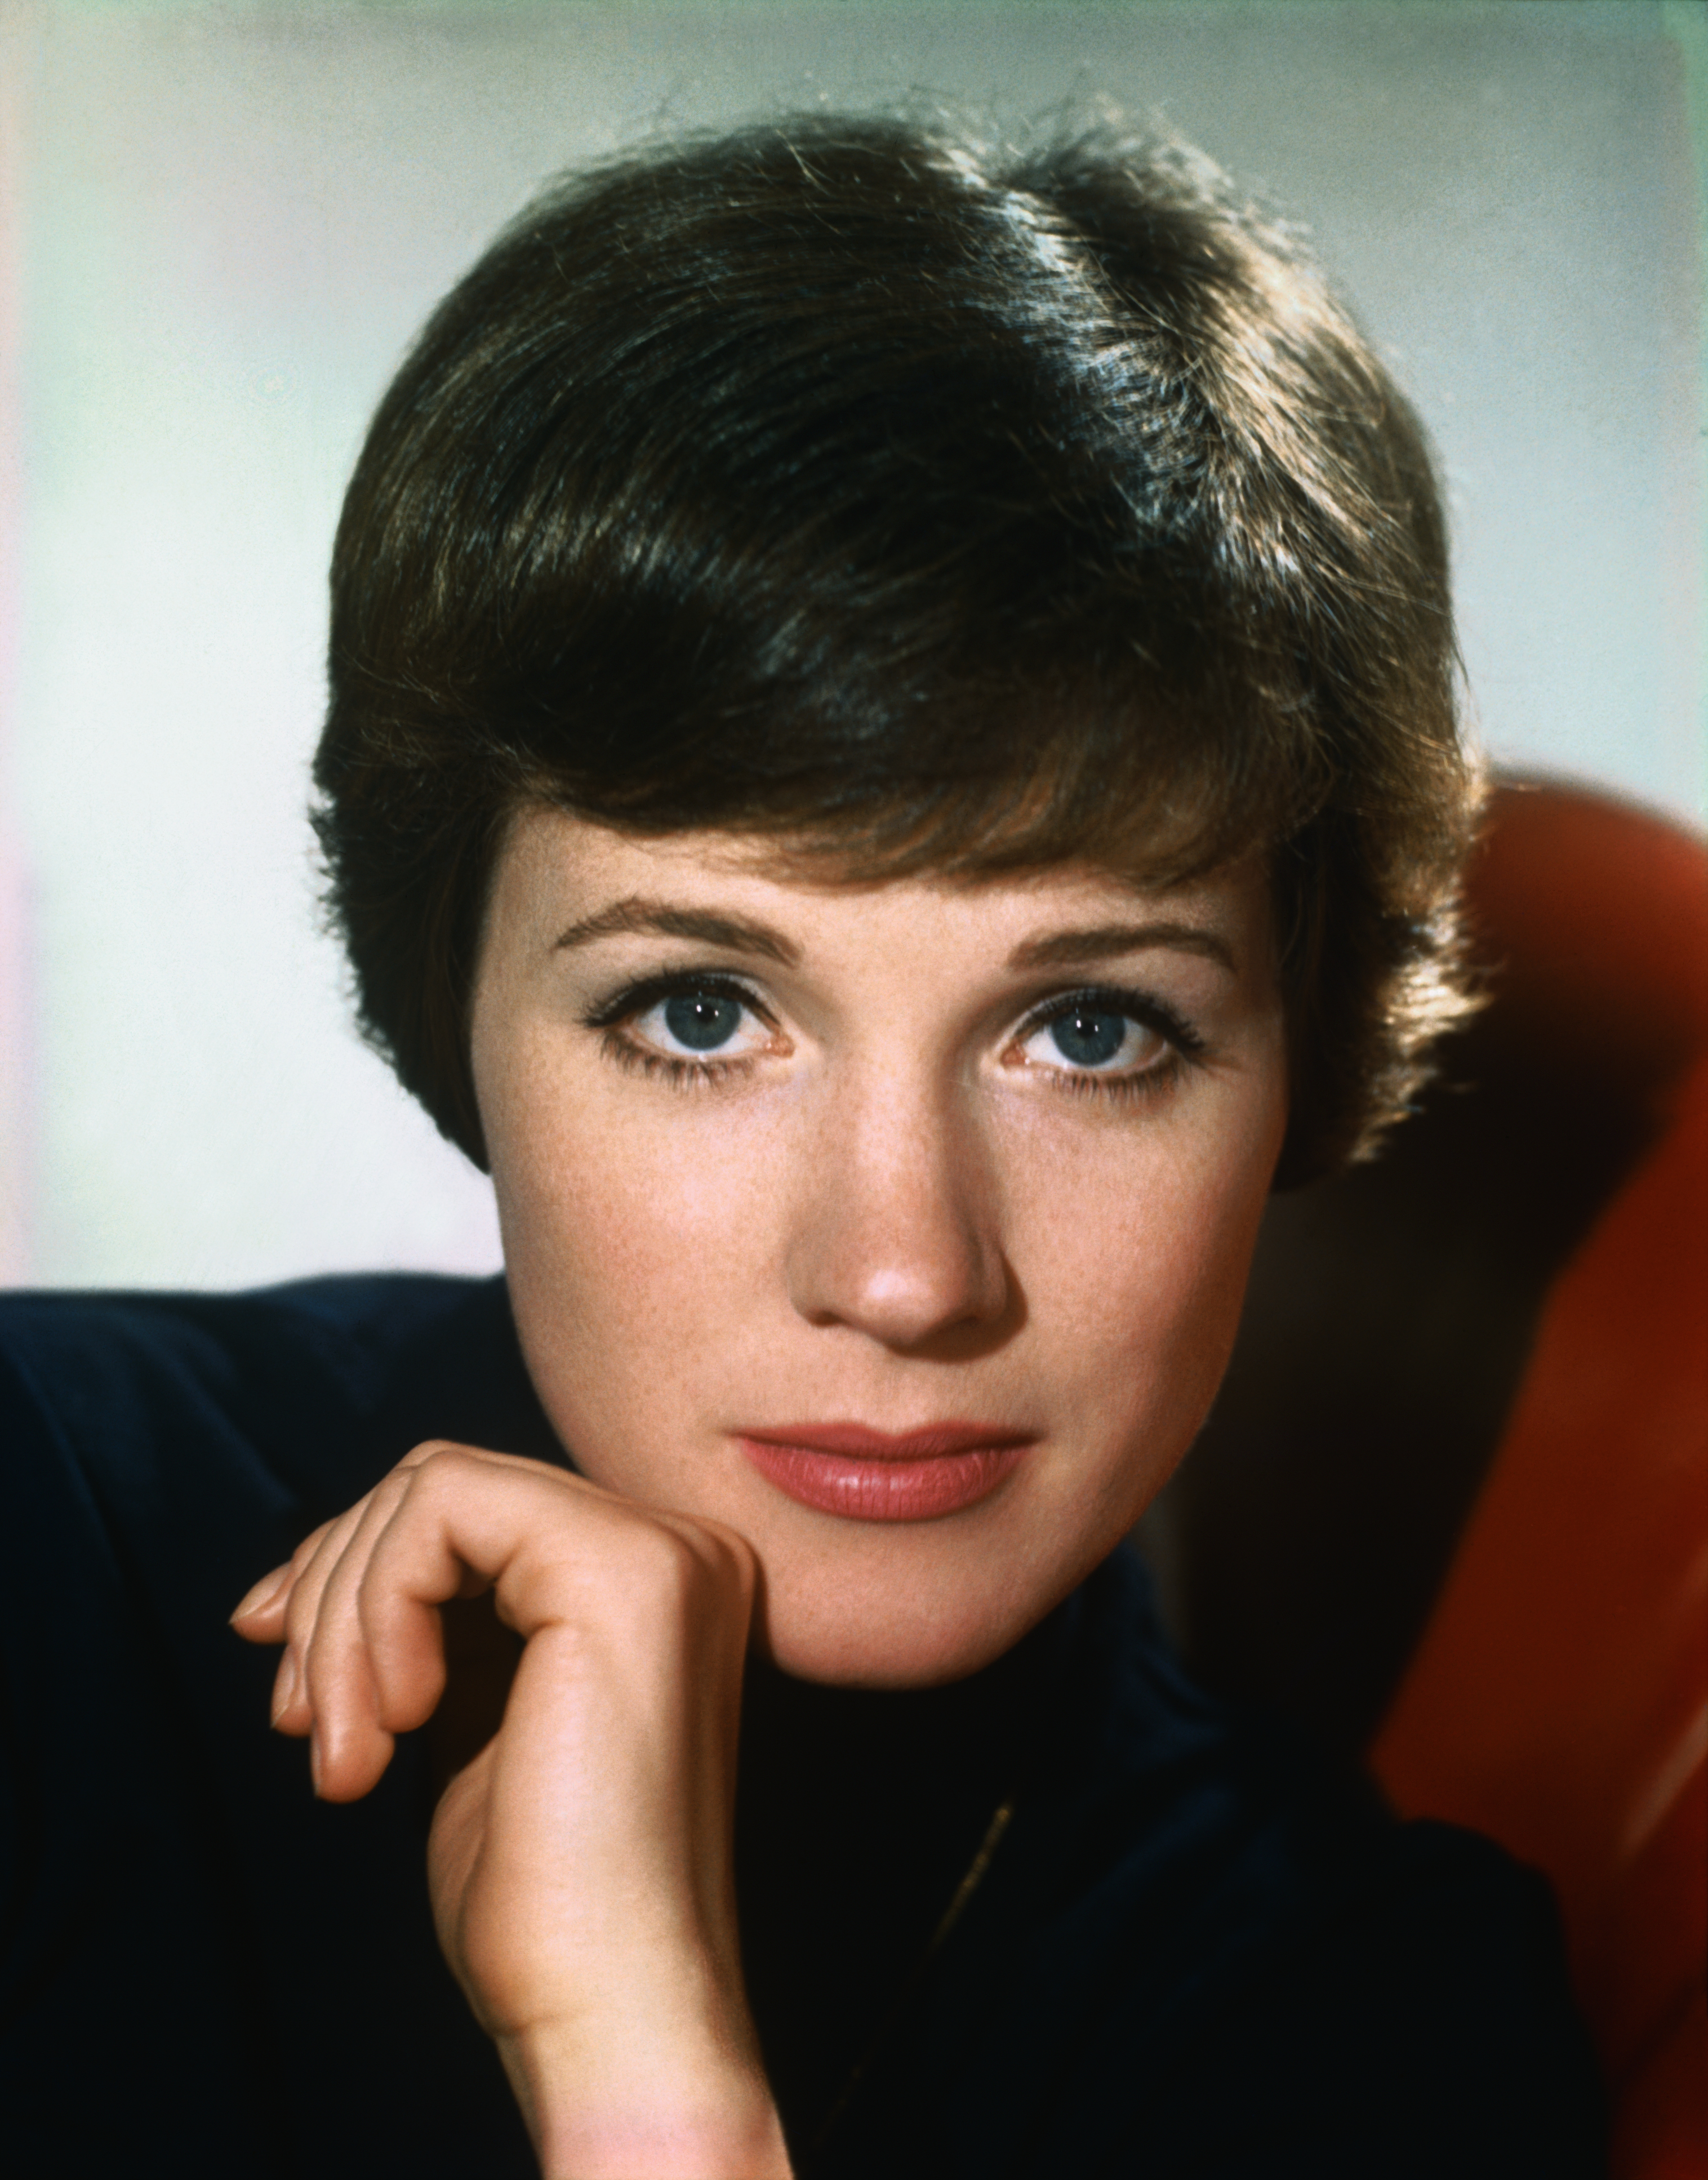 Julie Andrews photographed in 1965 | Source: Getty Images